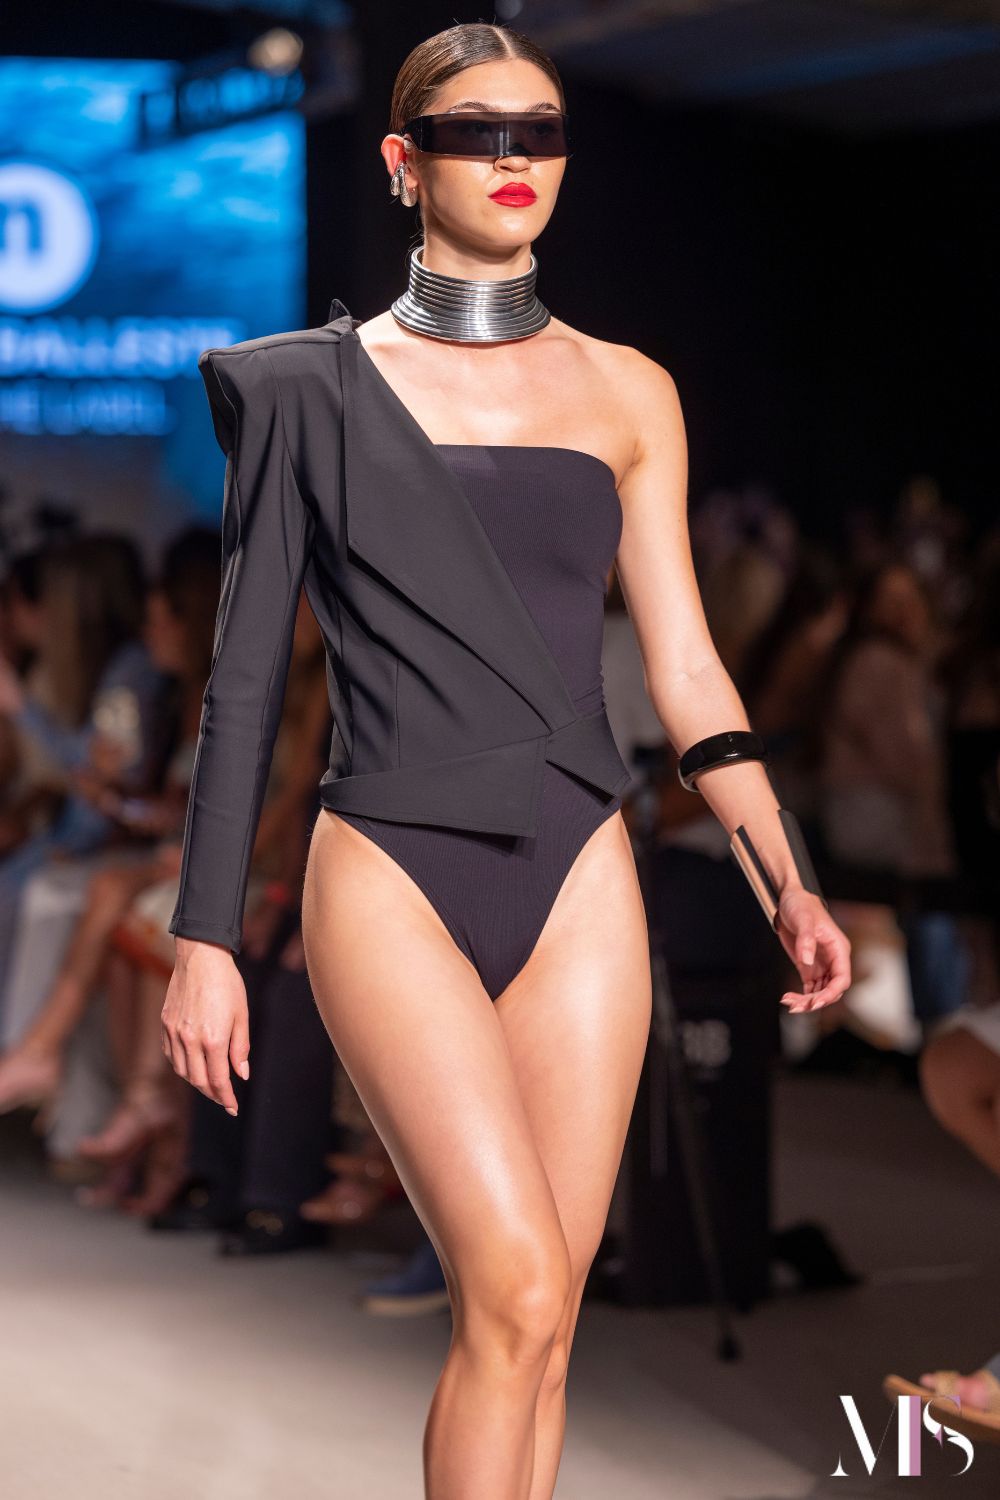 Istituto Marangoni Miami Made A Splash For The 3rd Edition Of Paraiso 2023